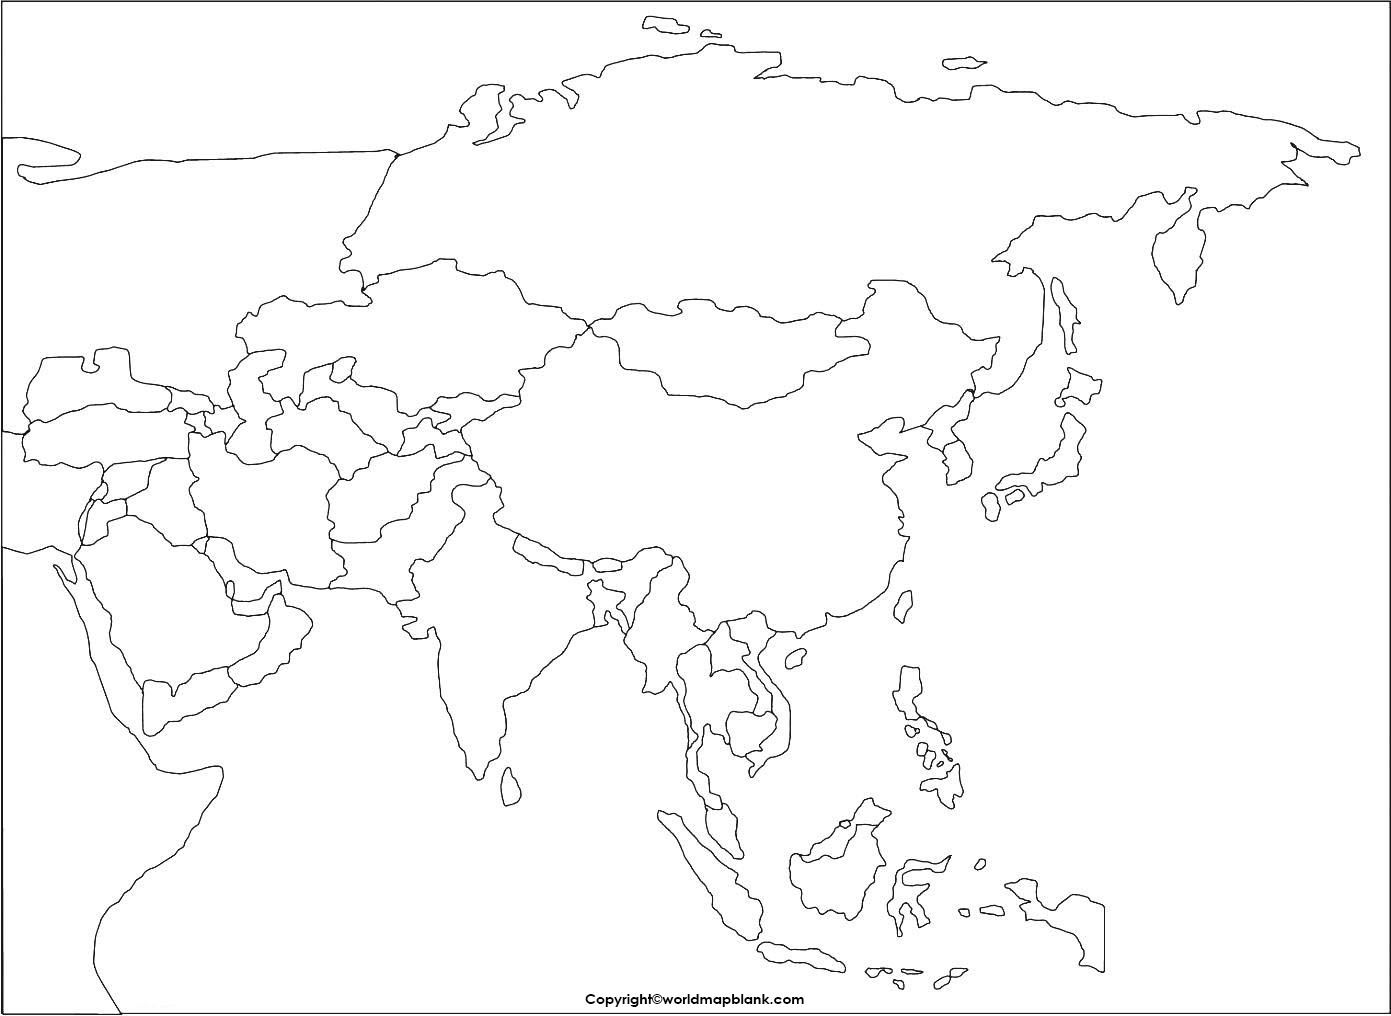 Blank Map of Asia - Outline